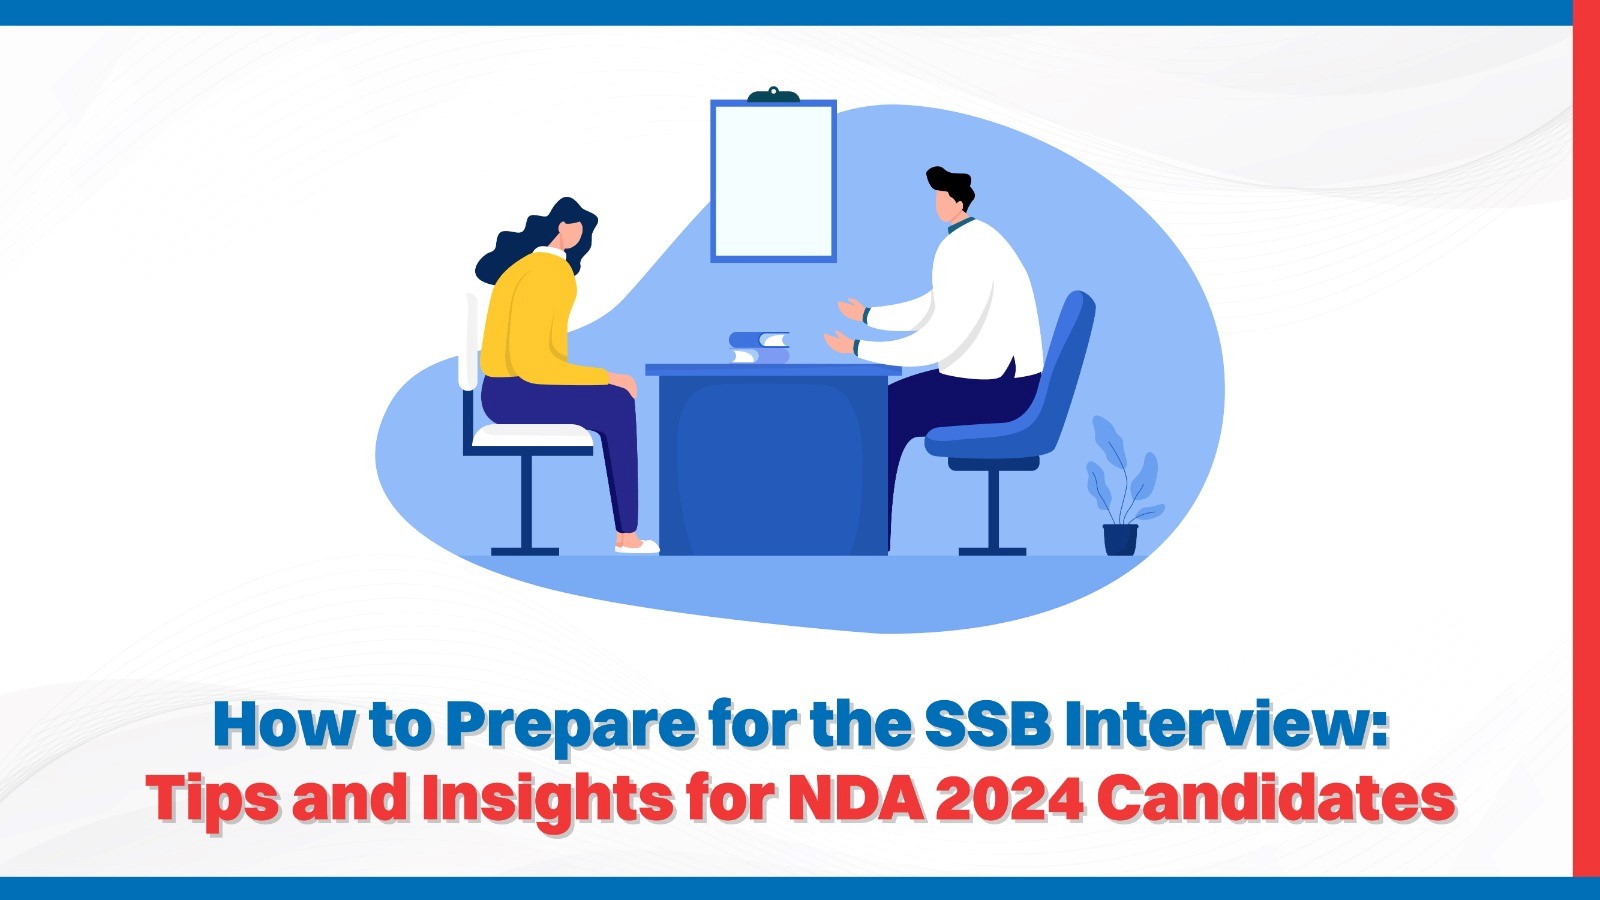 How to Prepare for the SSB Interview Tips and Insights for NDA 2024 Candidates.jpg